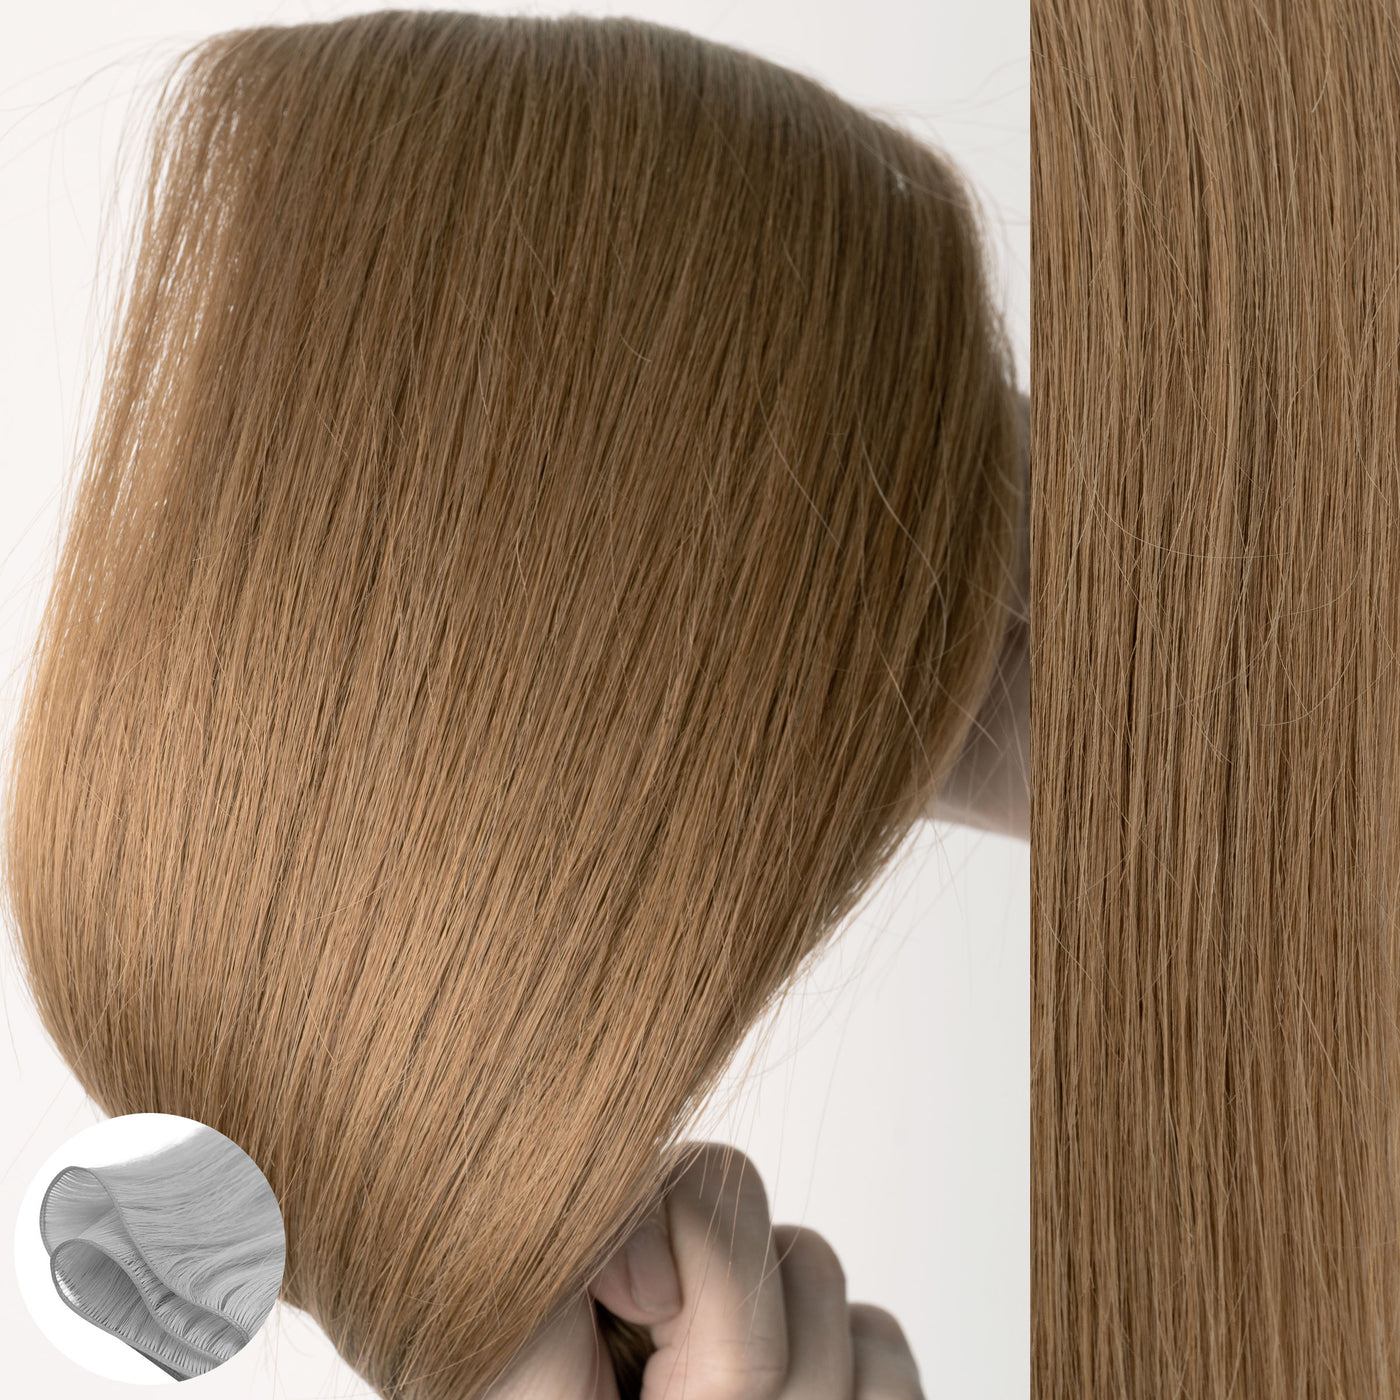 #8 Golden Brown- Straight Q-Weft Hair Extension by Aqua Hair Extensions